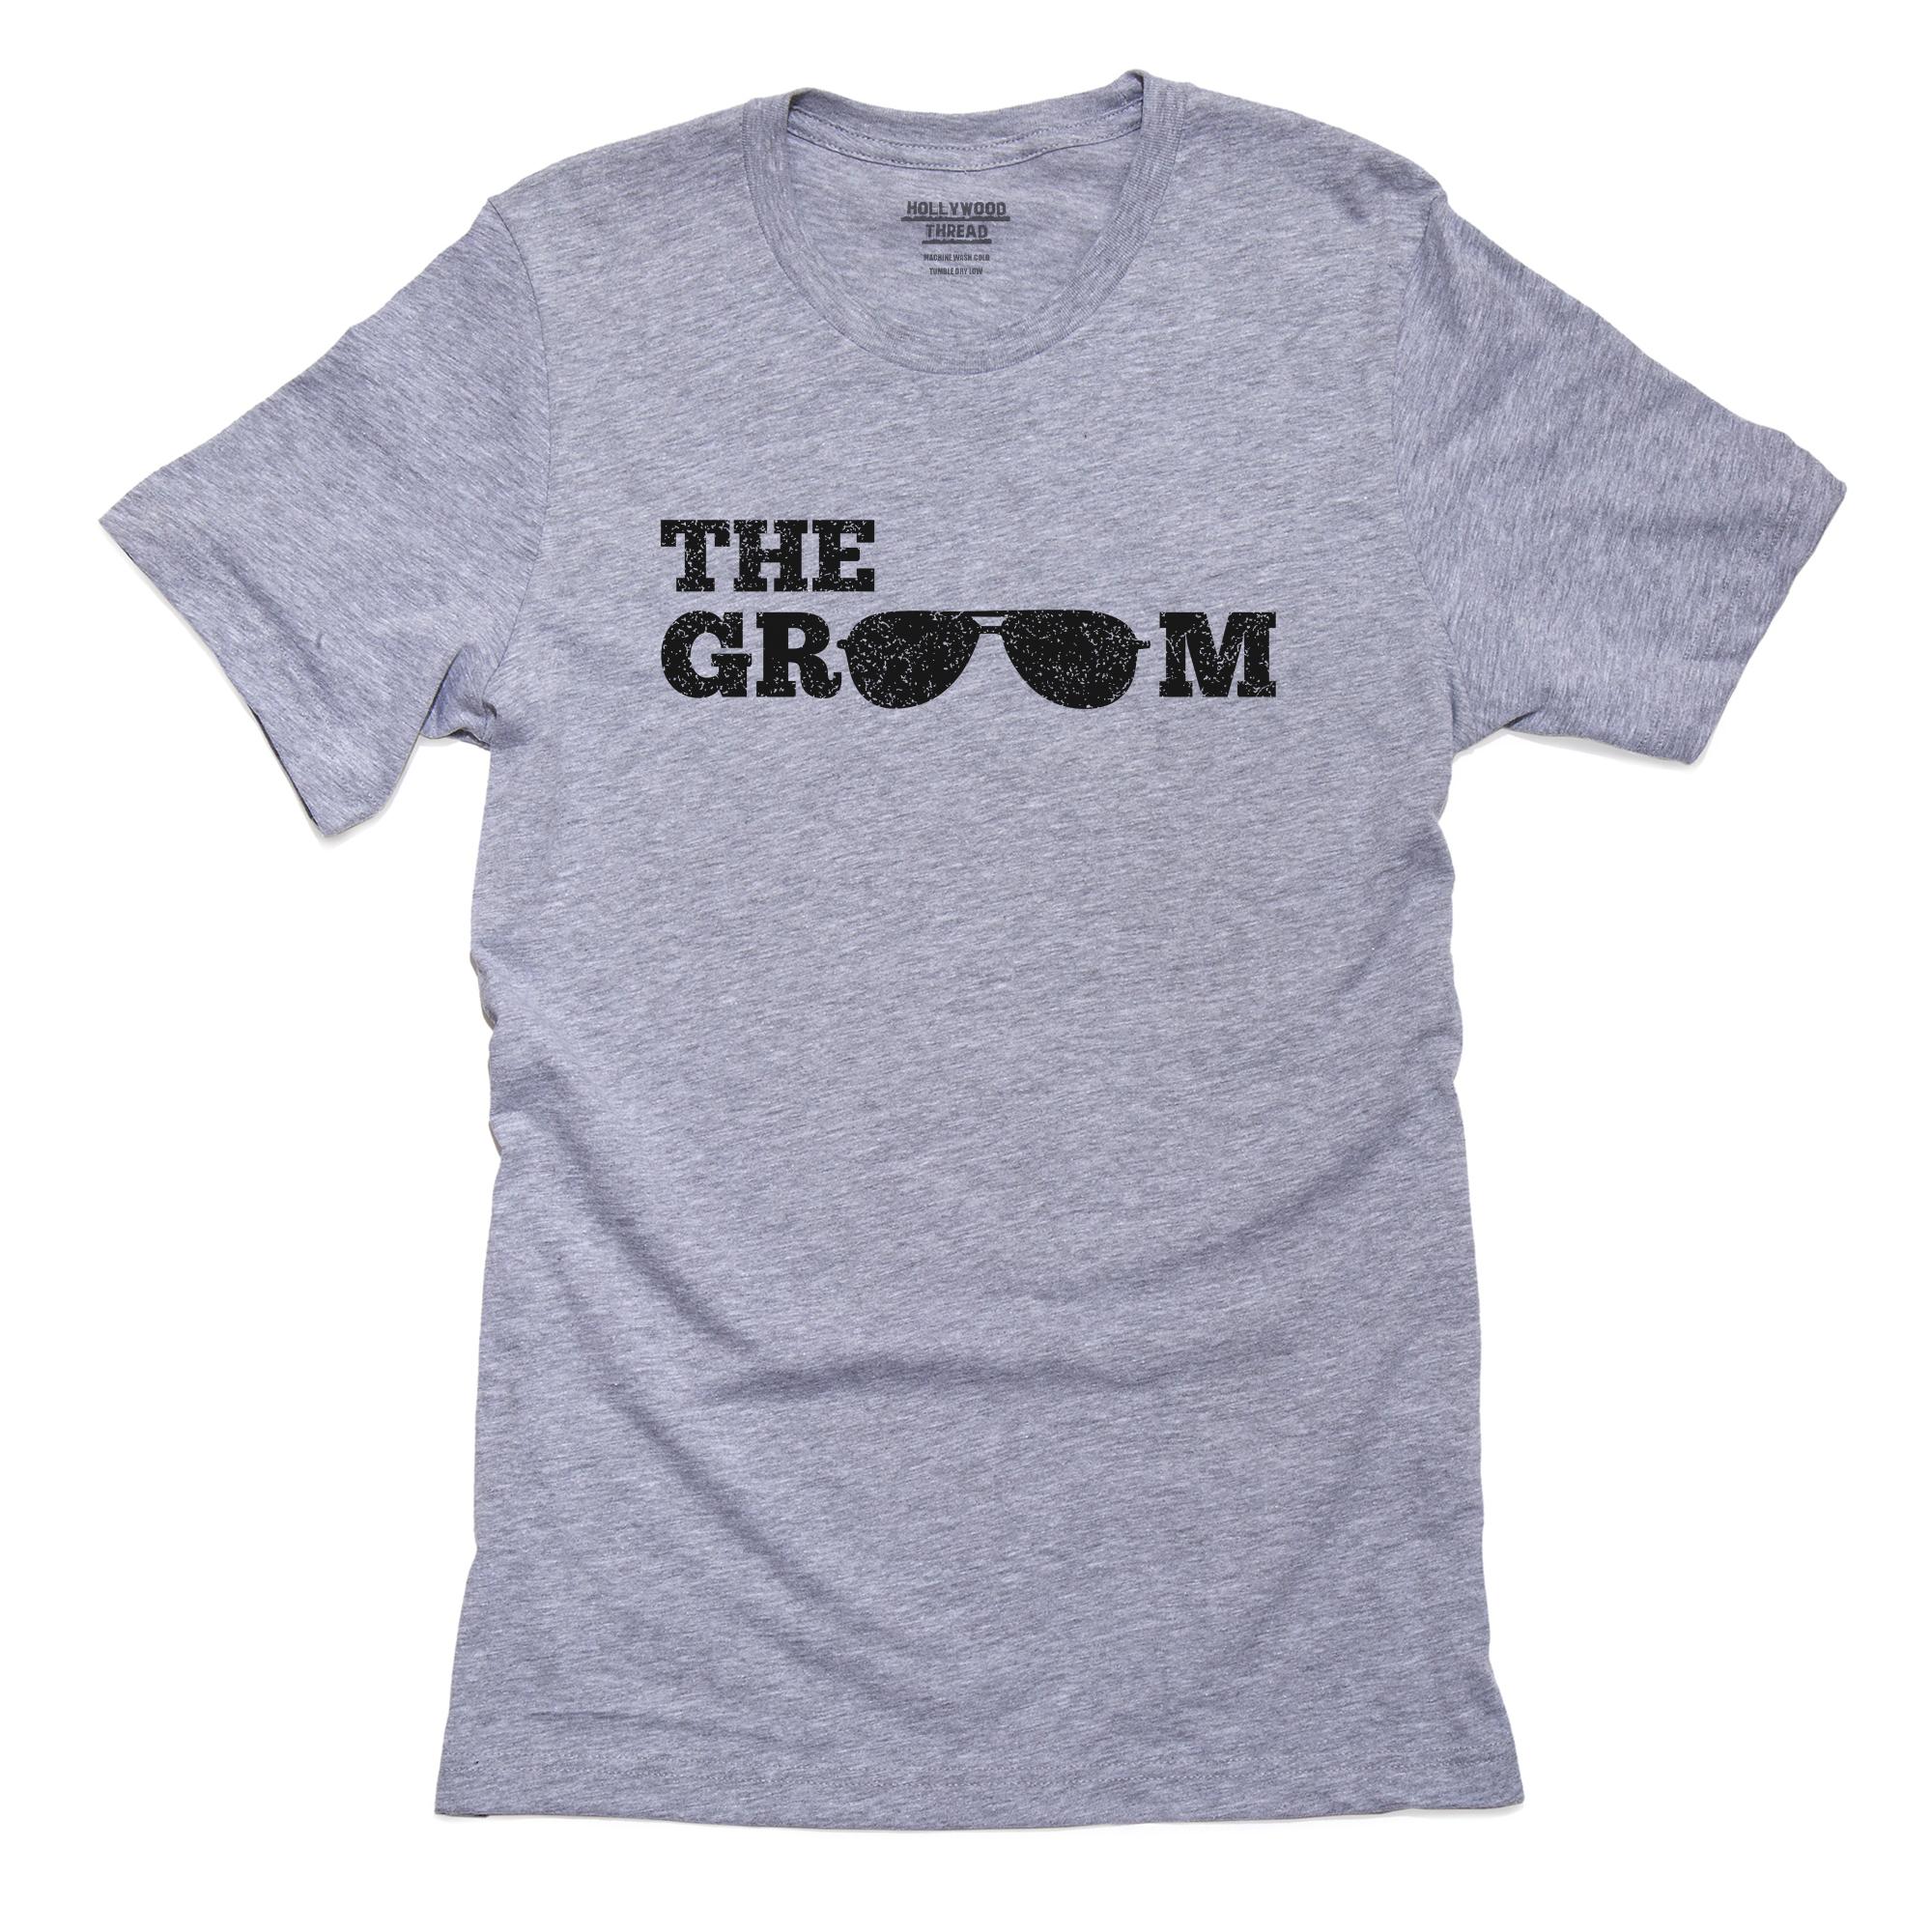 Bachelor Party The Groom Aviators Graphic Men's Grey T-Shirt - image 1 of 2